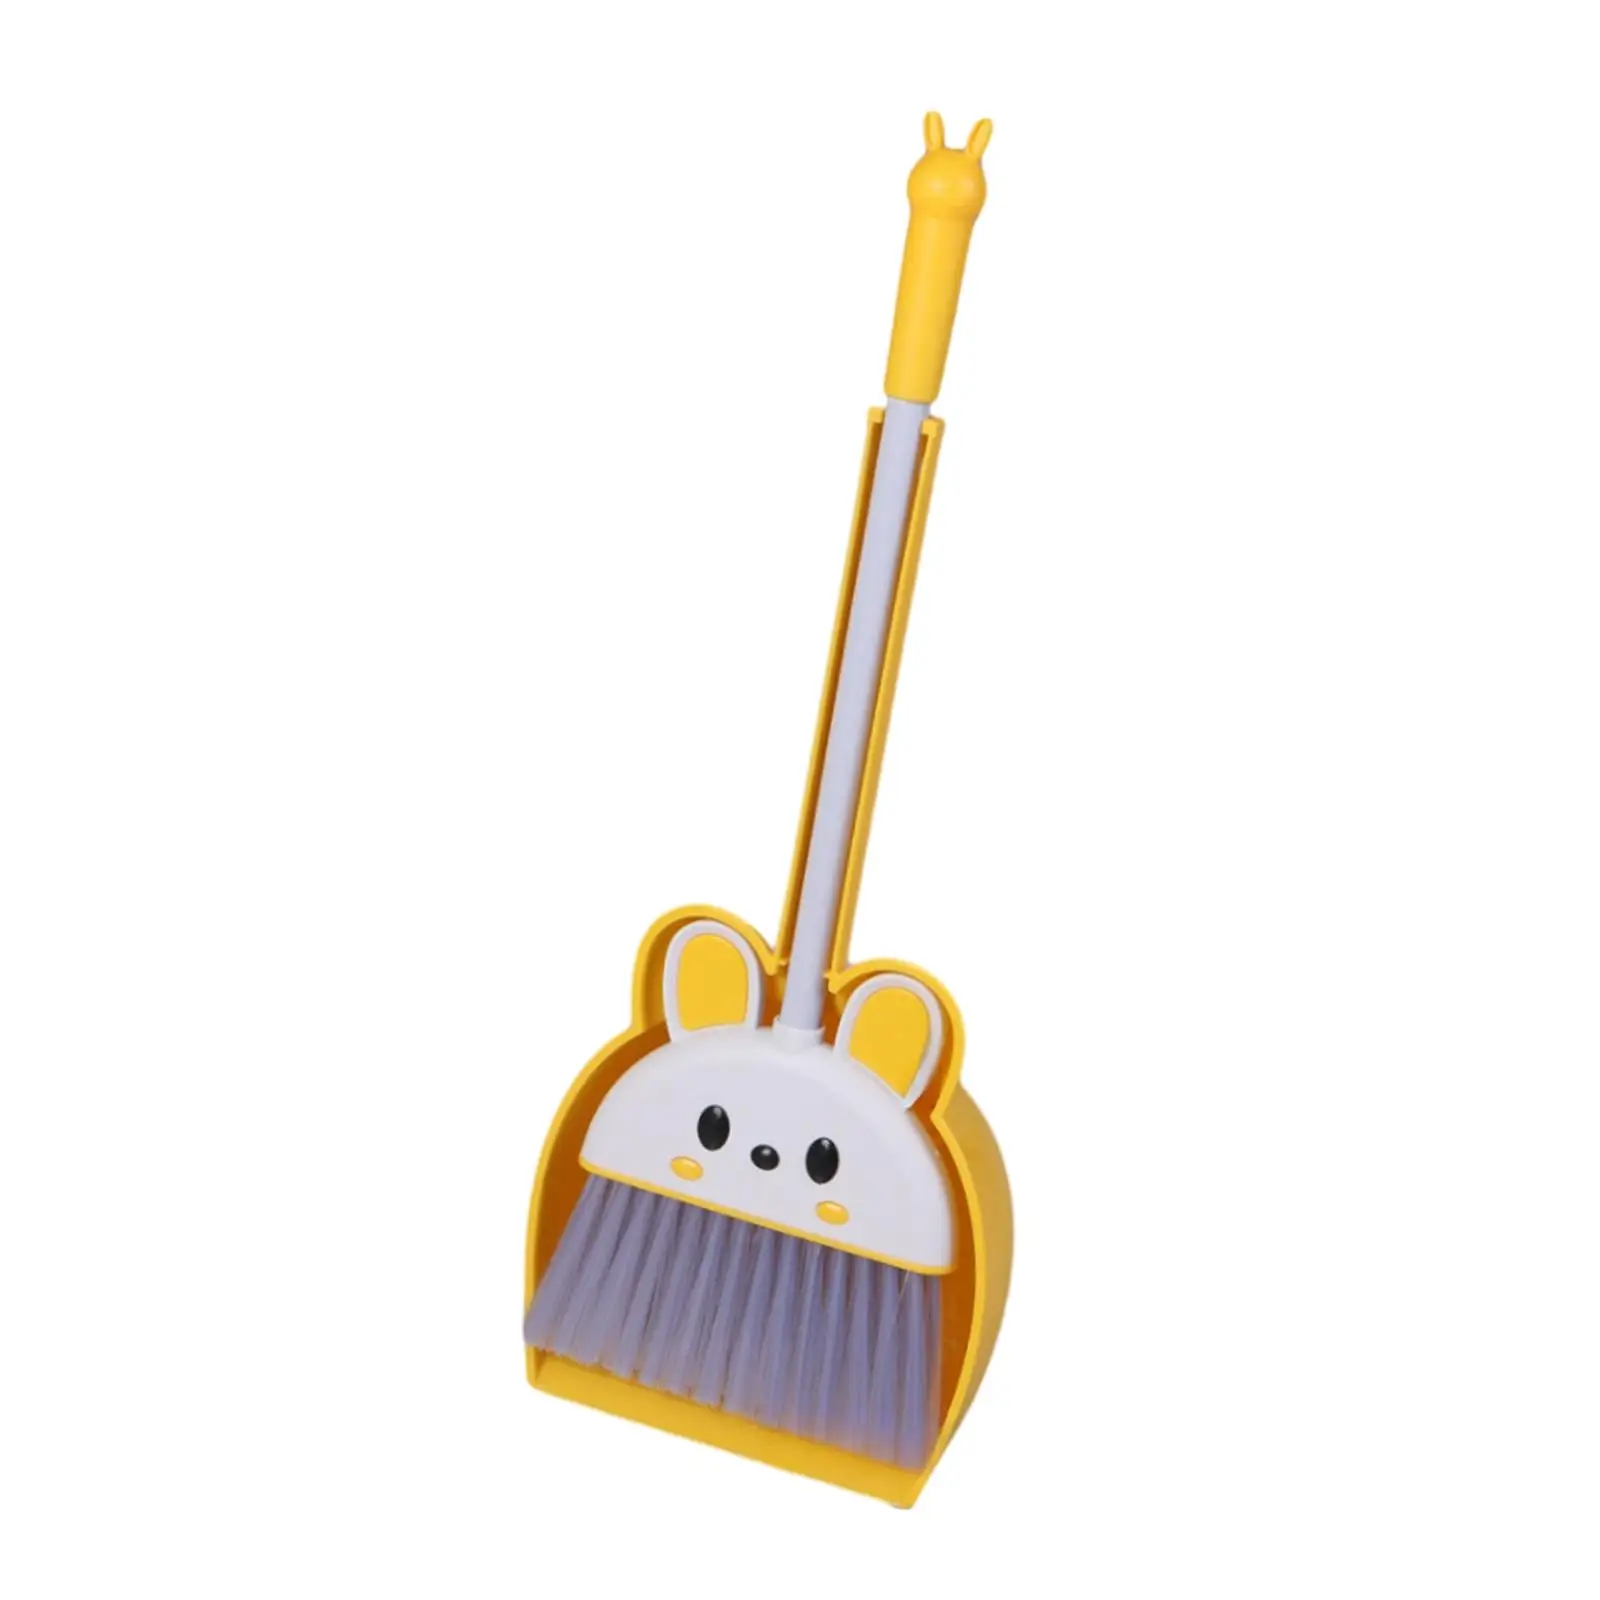 Mini Broom with Dustpan for Kids, Housekeeping Pretend Play Cleaning Tools,Play House Toy Cleaning Set for Preschool